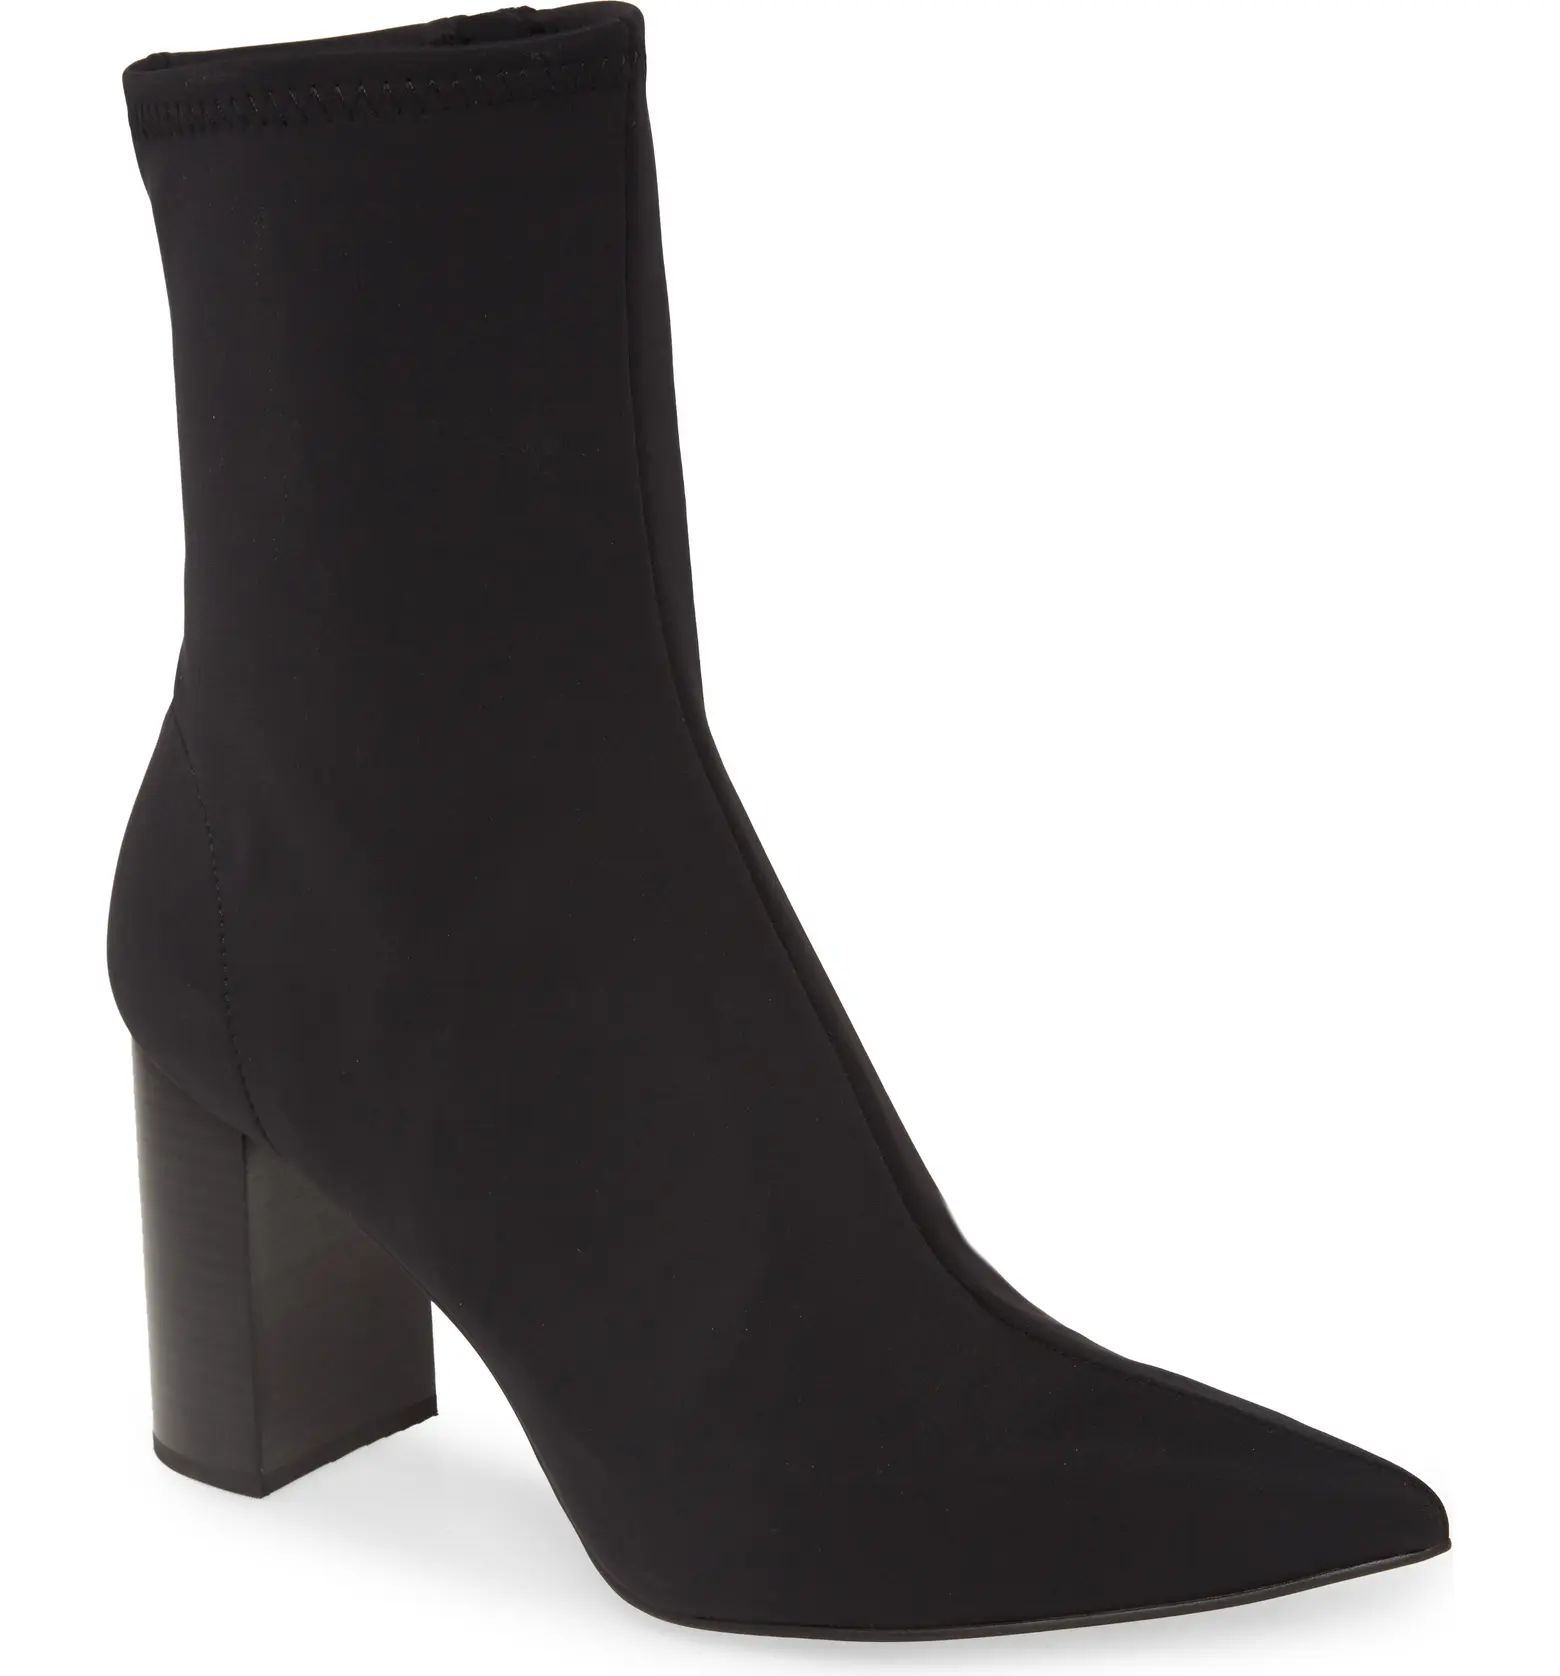 Rating 4.6out of5stars(269)269Siren Pointed Toe BootieJEFFREY CAMPBELL | Nordstrom